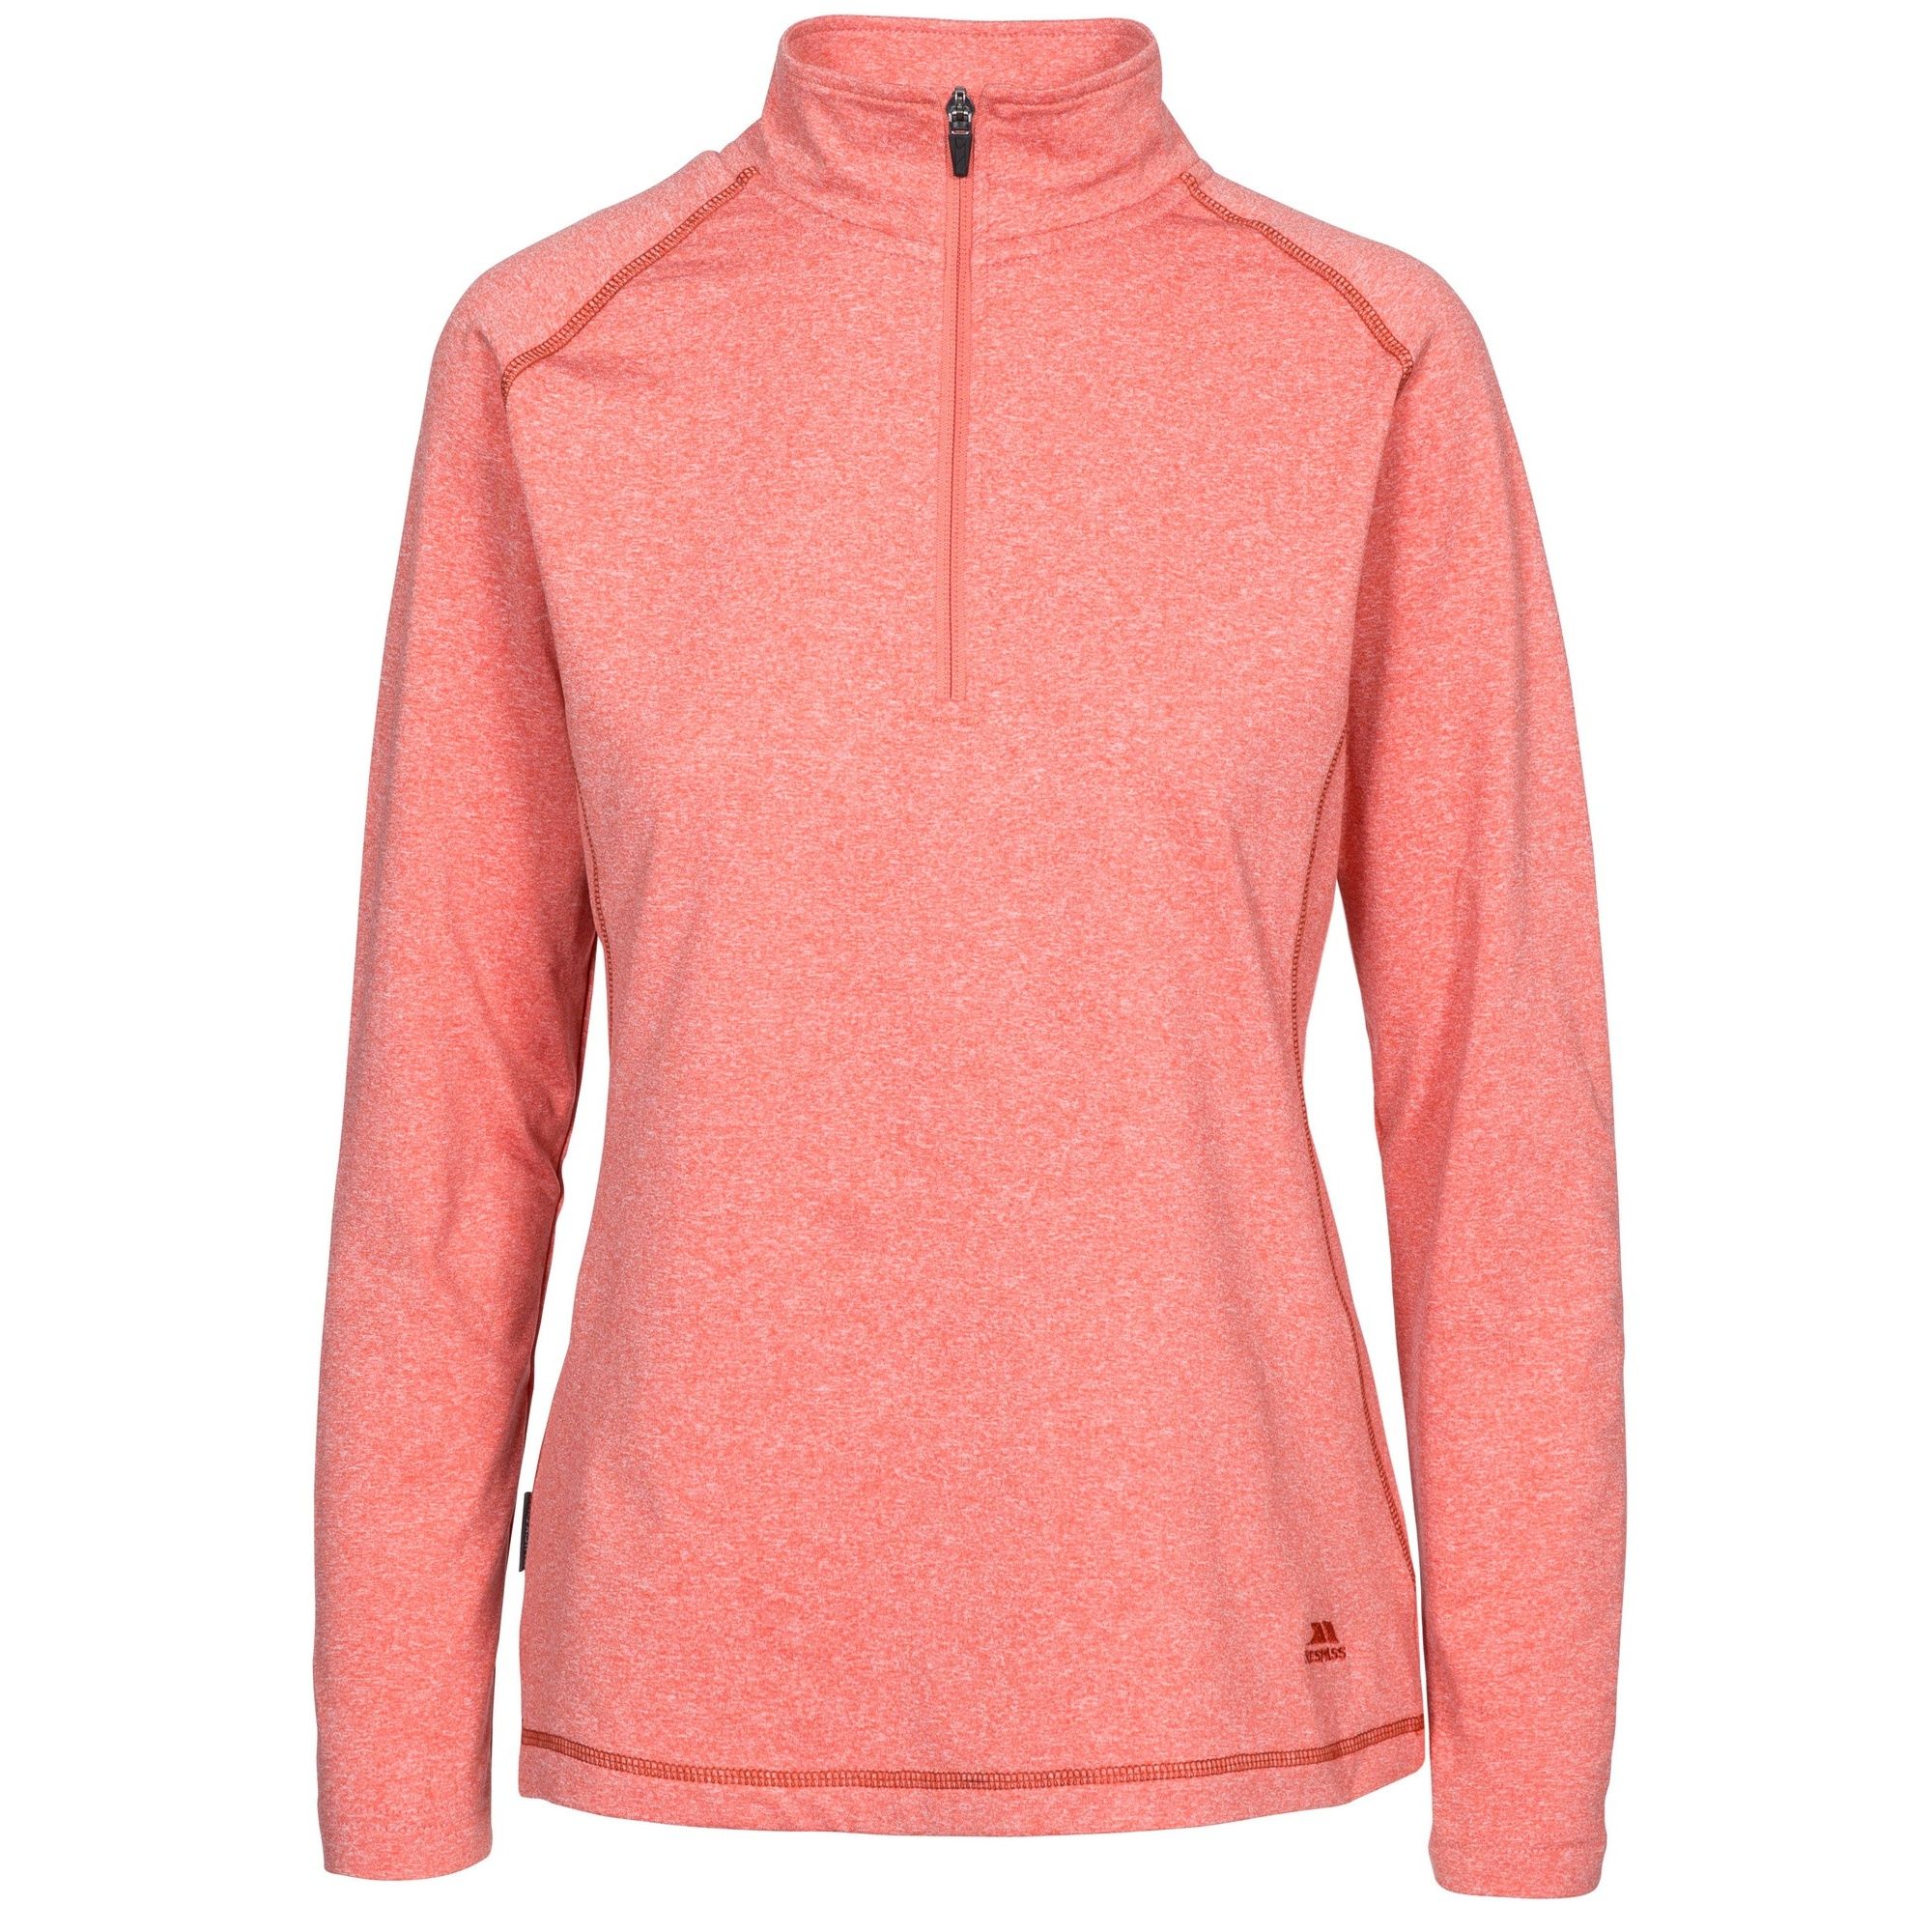 Long sleeved top with melange and brushed back. 1/2 zip neck. Flat cuff. Quick dry. 225gsm. 95% polyester, 5% elastane. Trespass Womens Chest Sizing (approx): XS/8 - 32in/81cm, S/10 - 34in/86cm, M/12 - 36in/91.4cm, L/14 - 38in/96.5cm, XL/16 - 40in/101.5cm, XXL/18 - 42in/106.5cm.